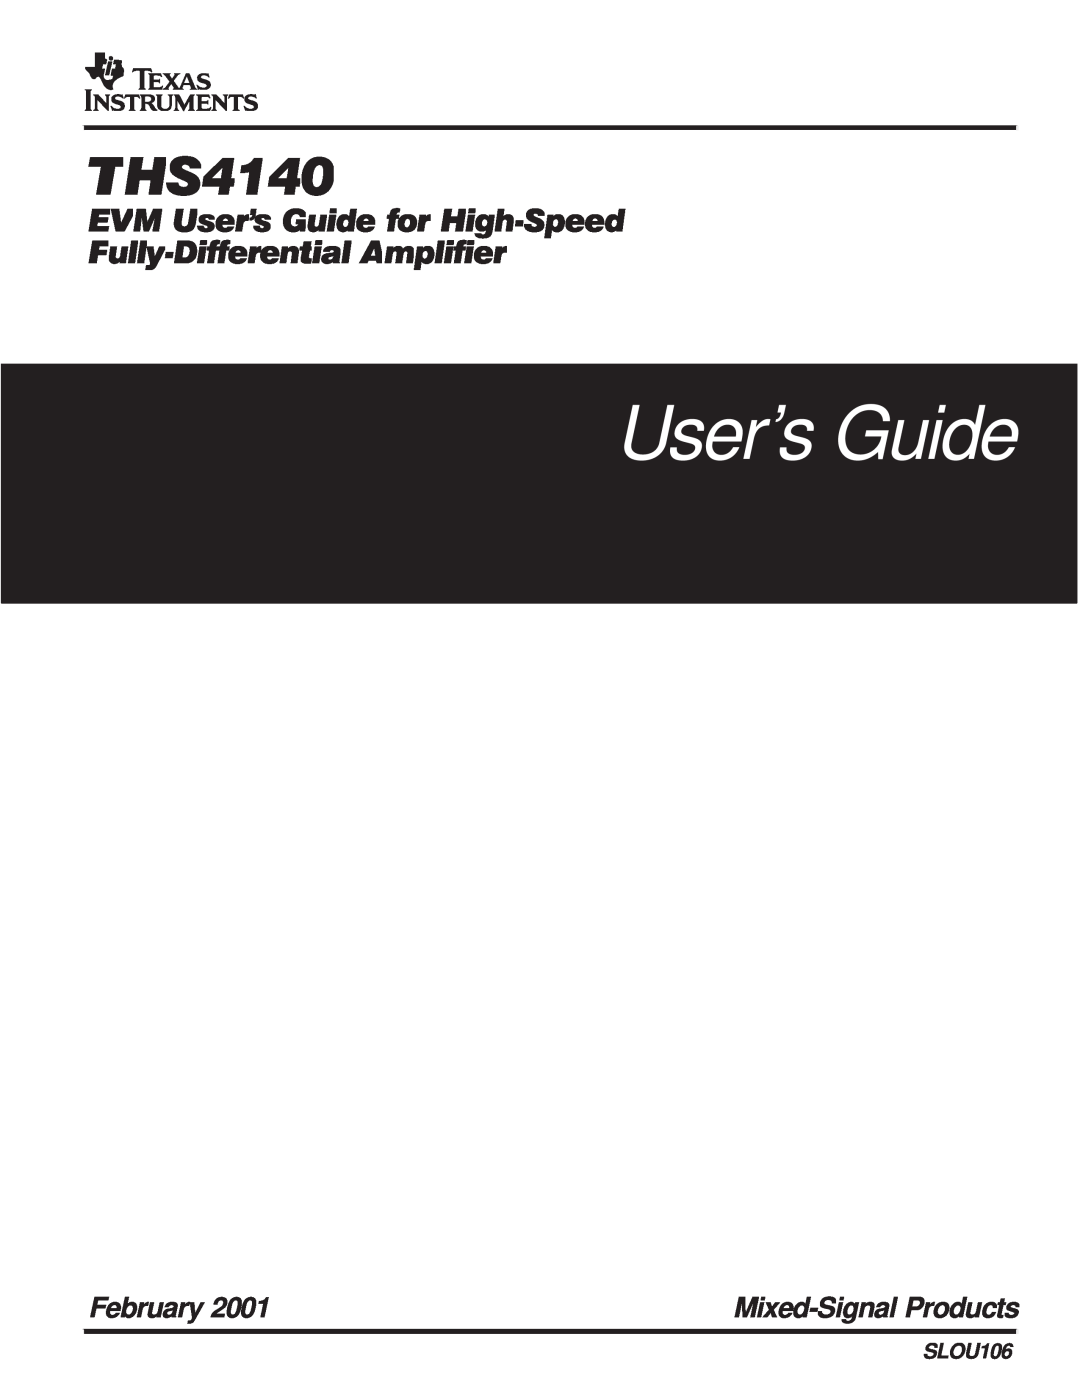 Texas Instruments SLOU106 manual THS4140, EVM Users Guide for High!Speed, Fully!Differential Amplifier, February 